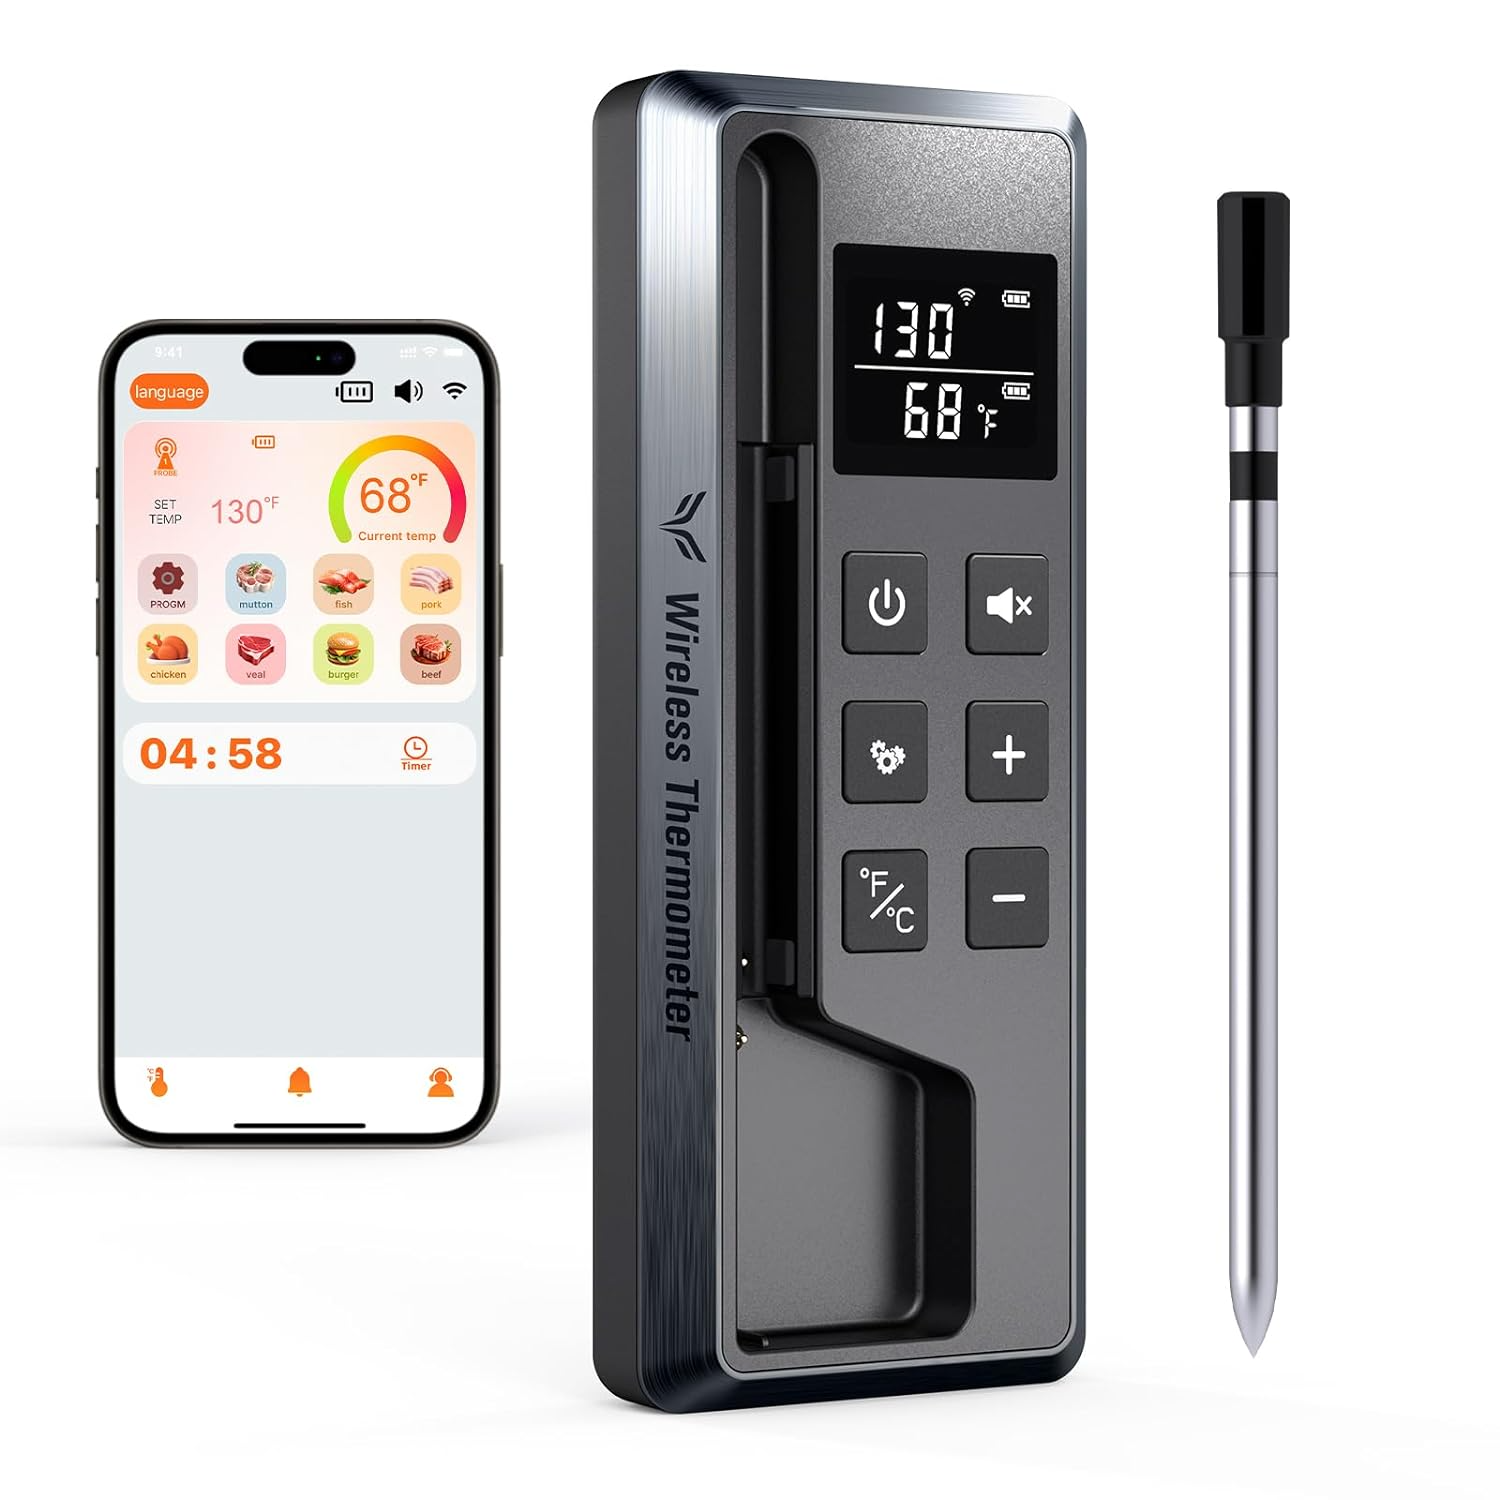 Wireless Meat Thermometer Digital, 800FT Long Range Bluetooth Cooking Thermometer, Food Thermometer for Remote Monitoring of Grill, Oven, Smoker, Air Fryer, Rotisserie, iOS & Android App - Barbecue Whizz...Watch My Smoke!